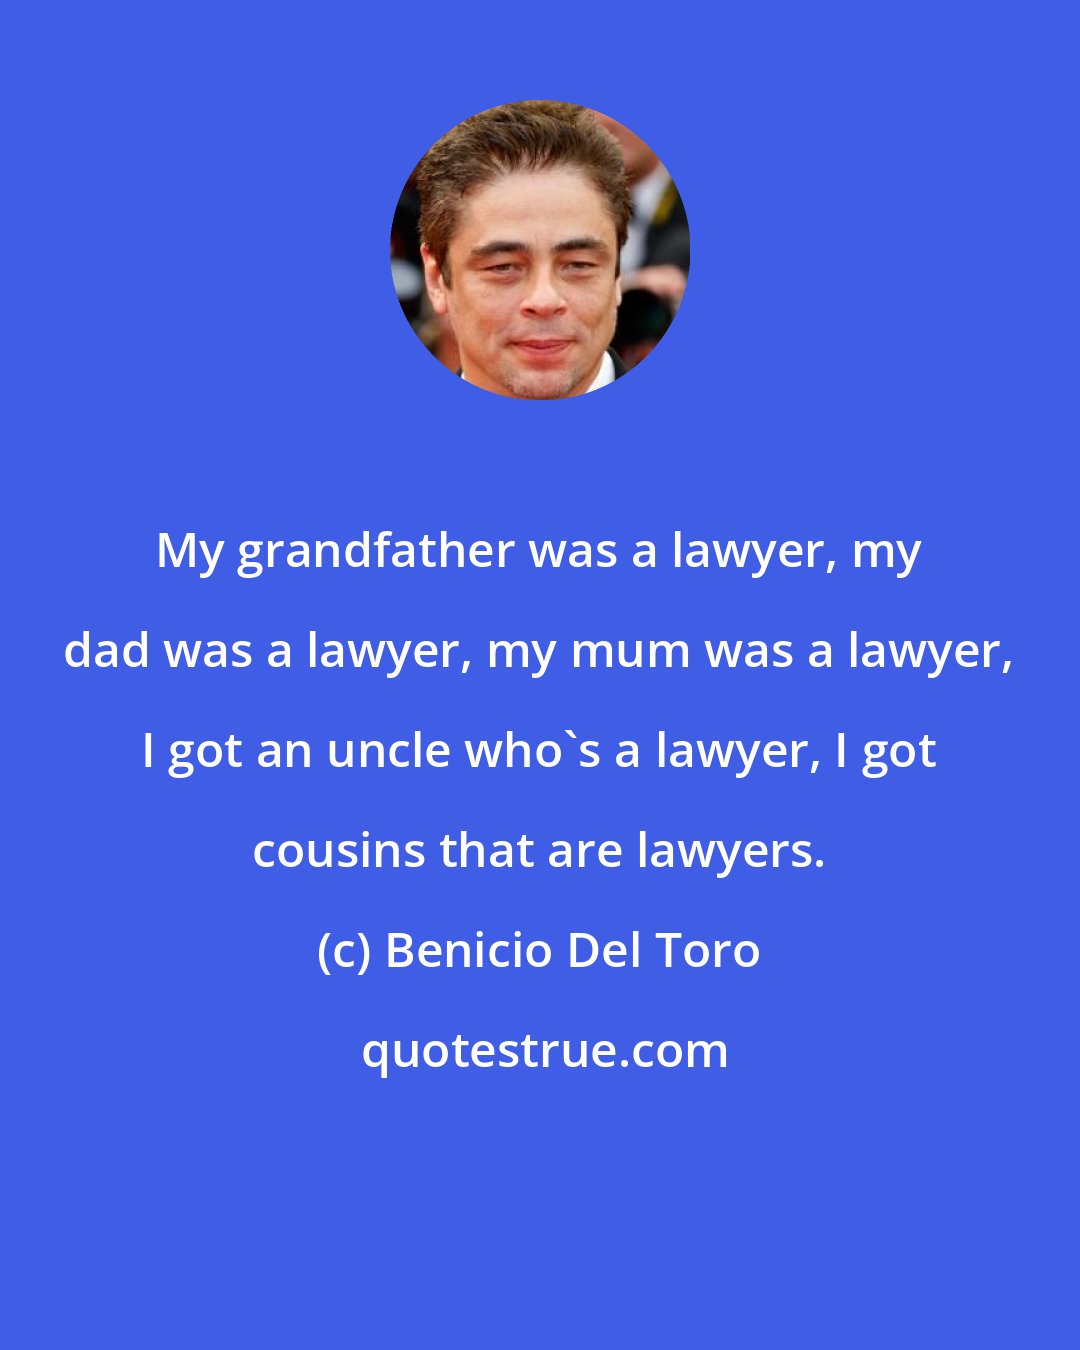 Benicio Del Toro: My grandfather was a lawyer, my dad was a lawyer, my mum was a lawyer, I got an uncle who's a lawyer, I got cousins that are lawyers.